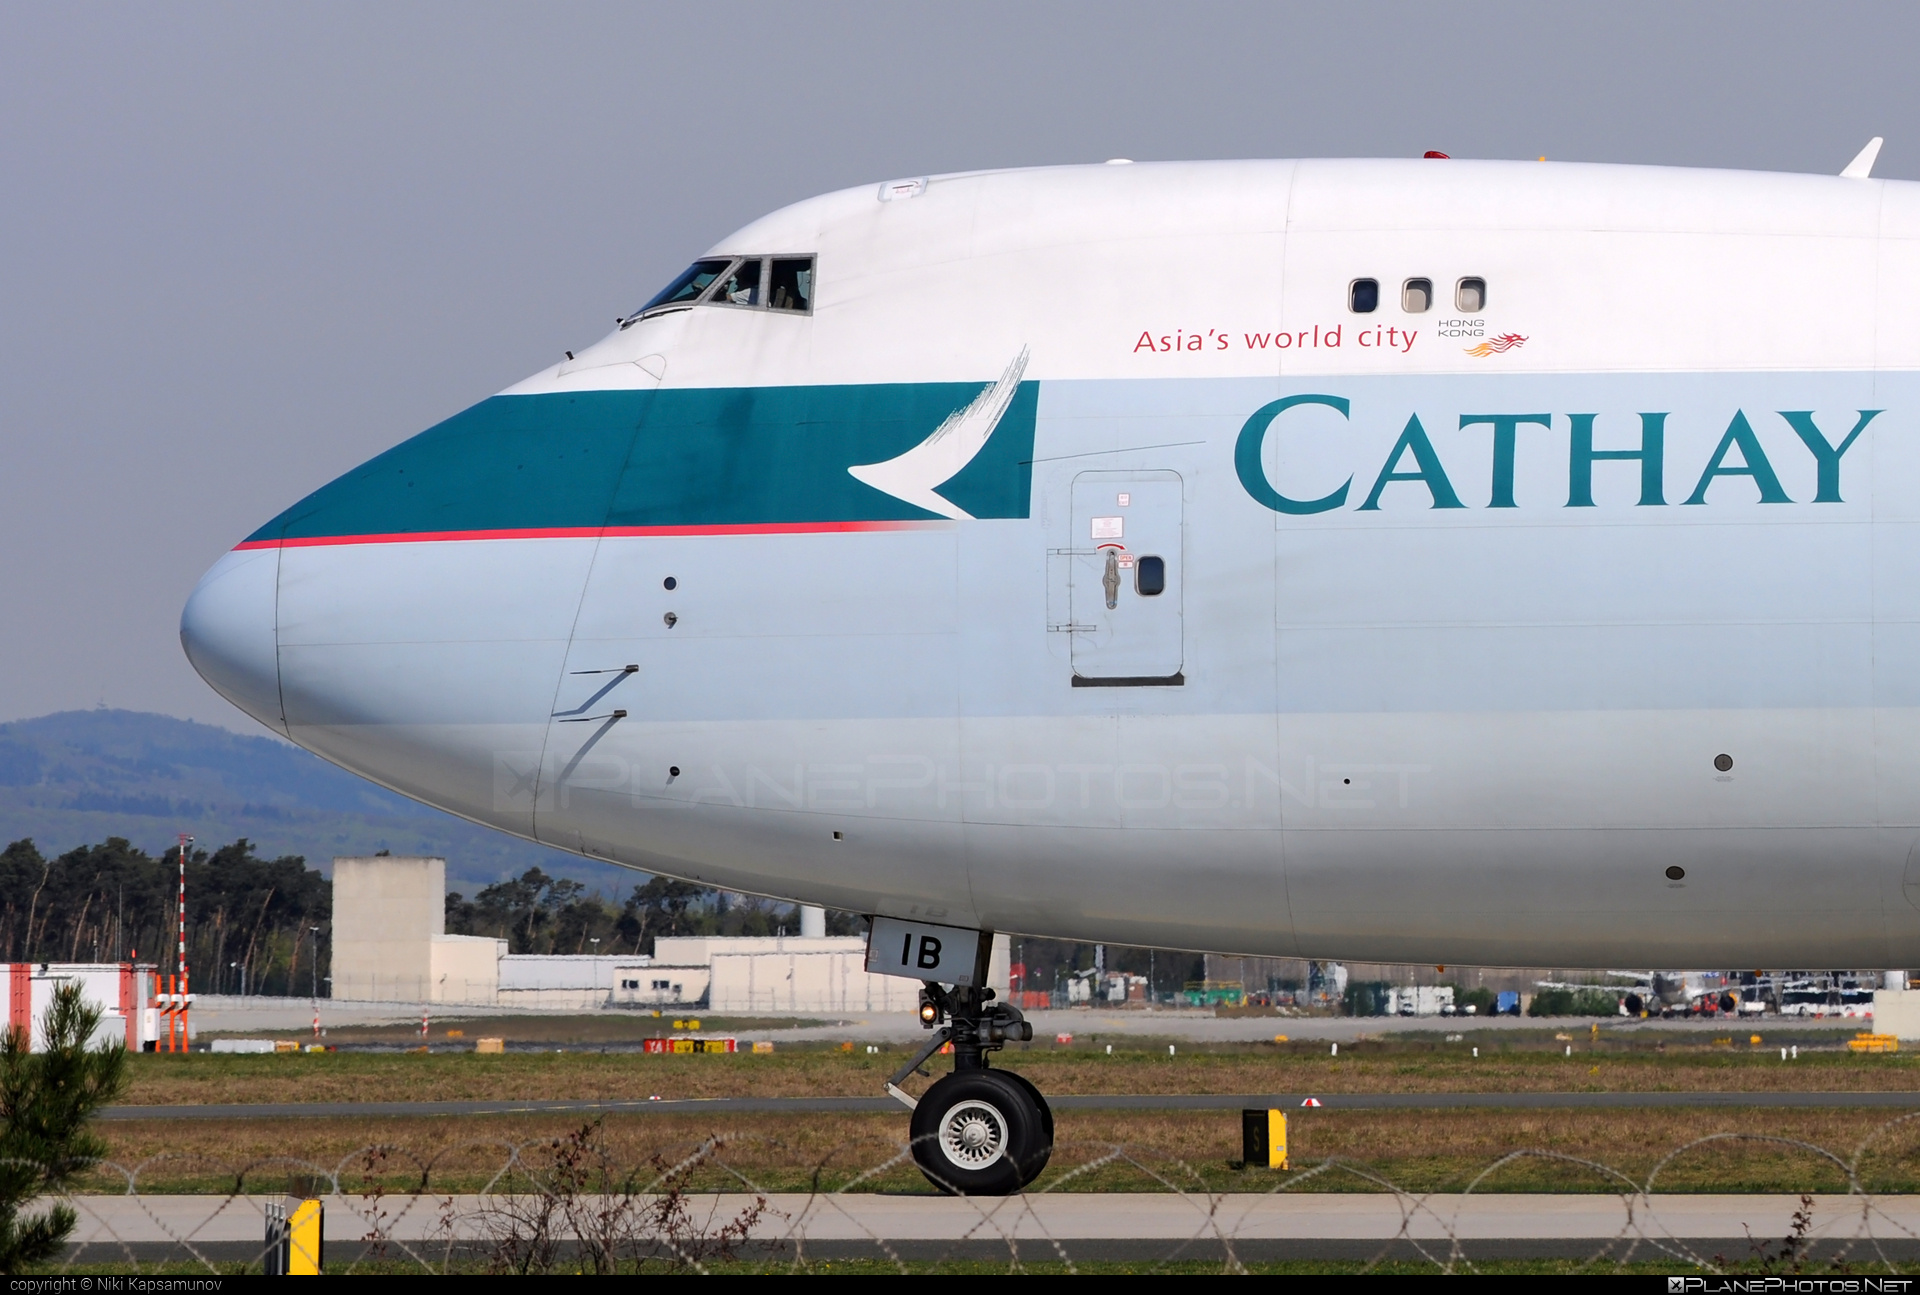 Boeing 747-400F - B-LIB operated by Cathay Pacific Cargo #b747 #boeing #boeing747 #cathaypacific #cathaypacificcargo #jumbo